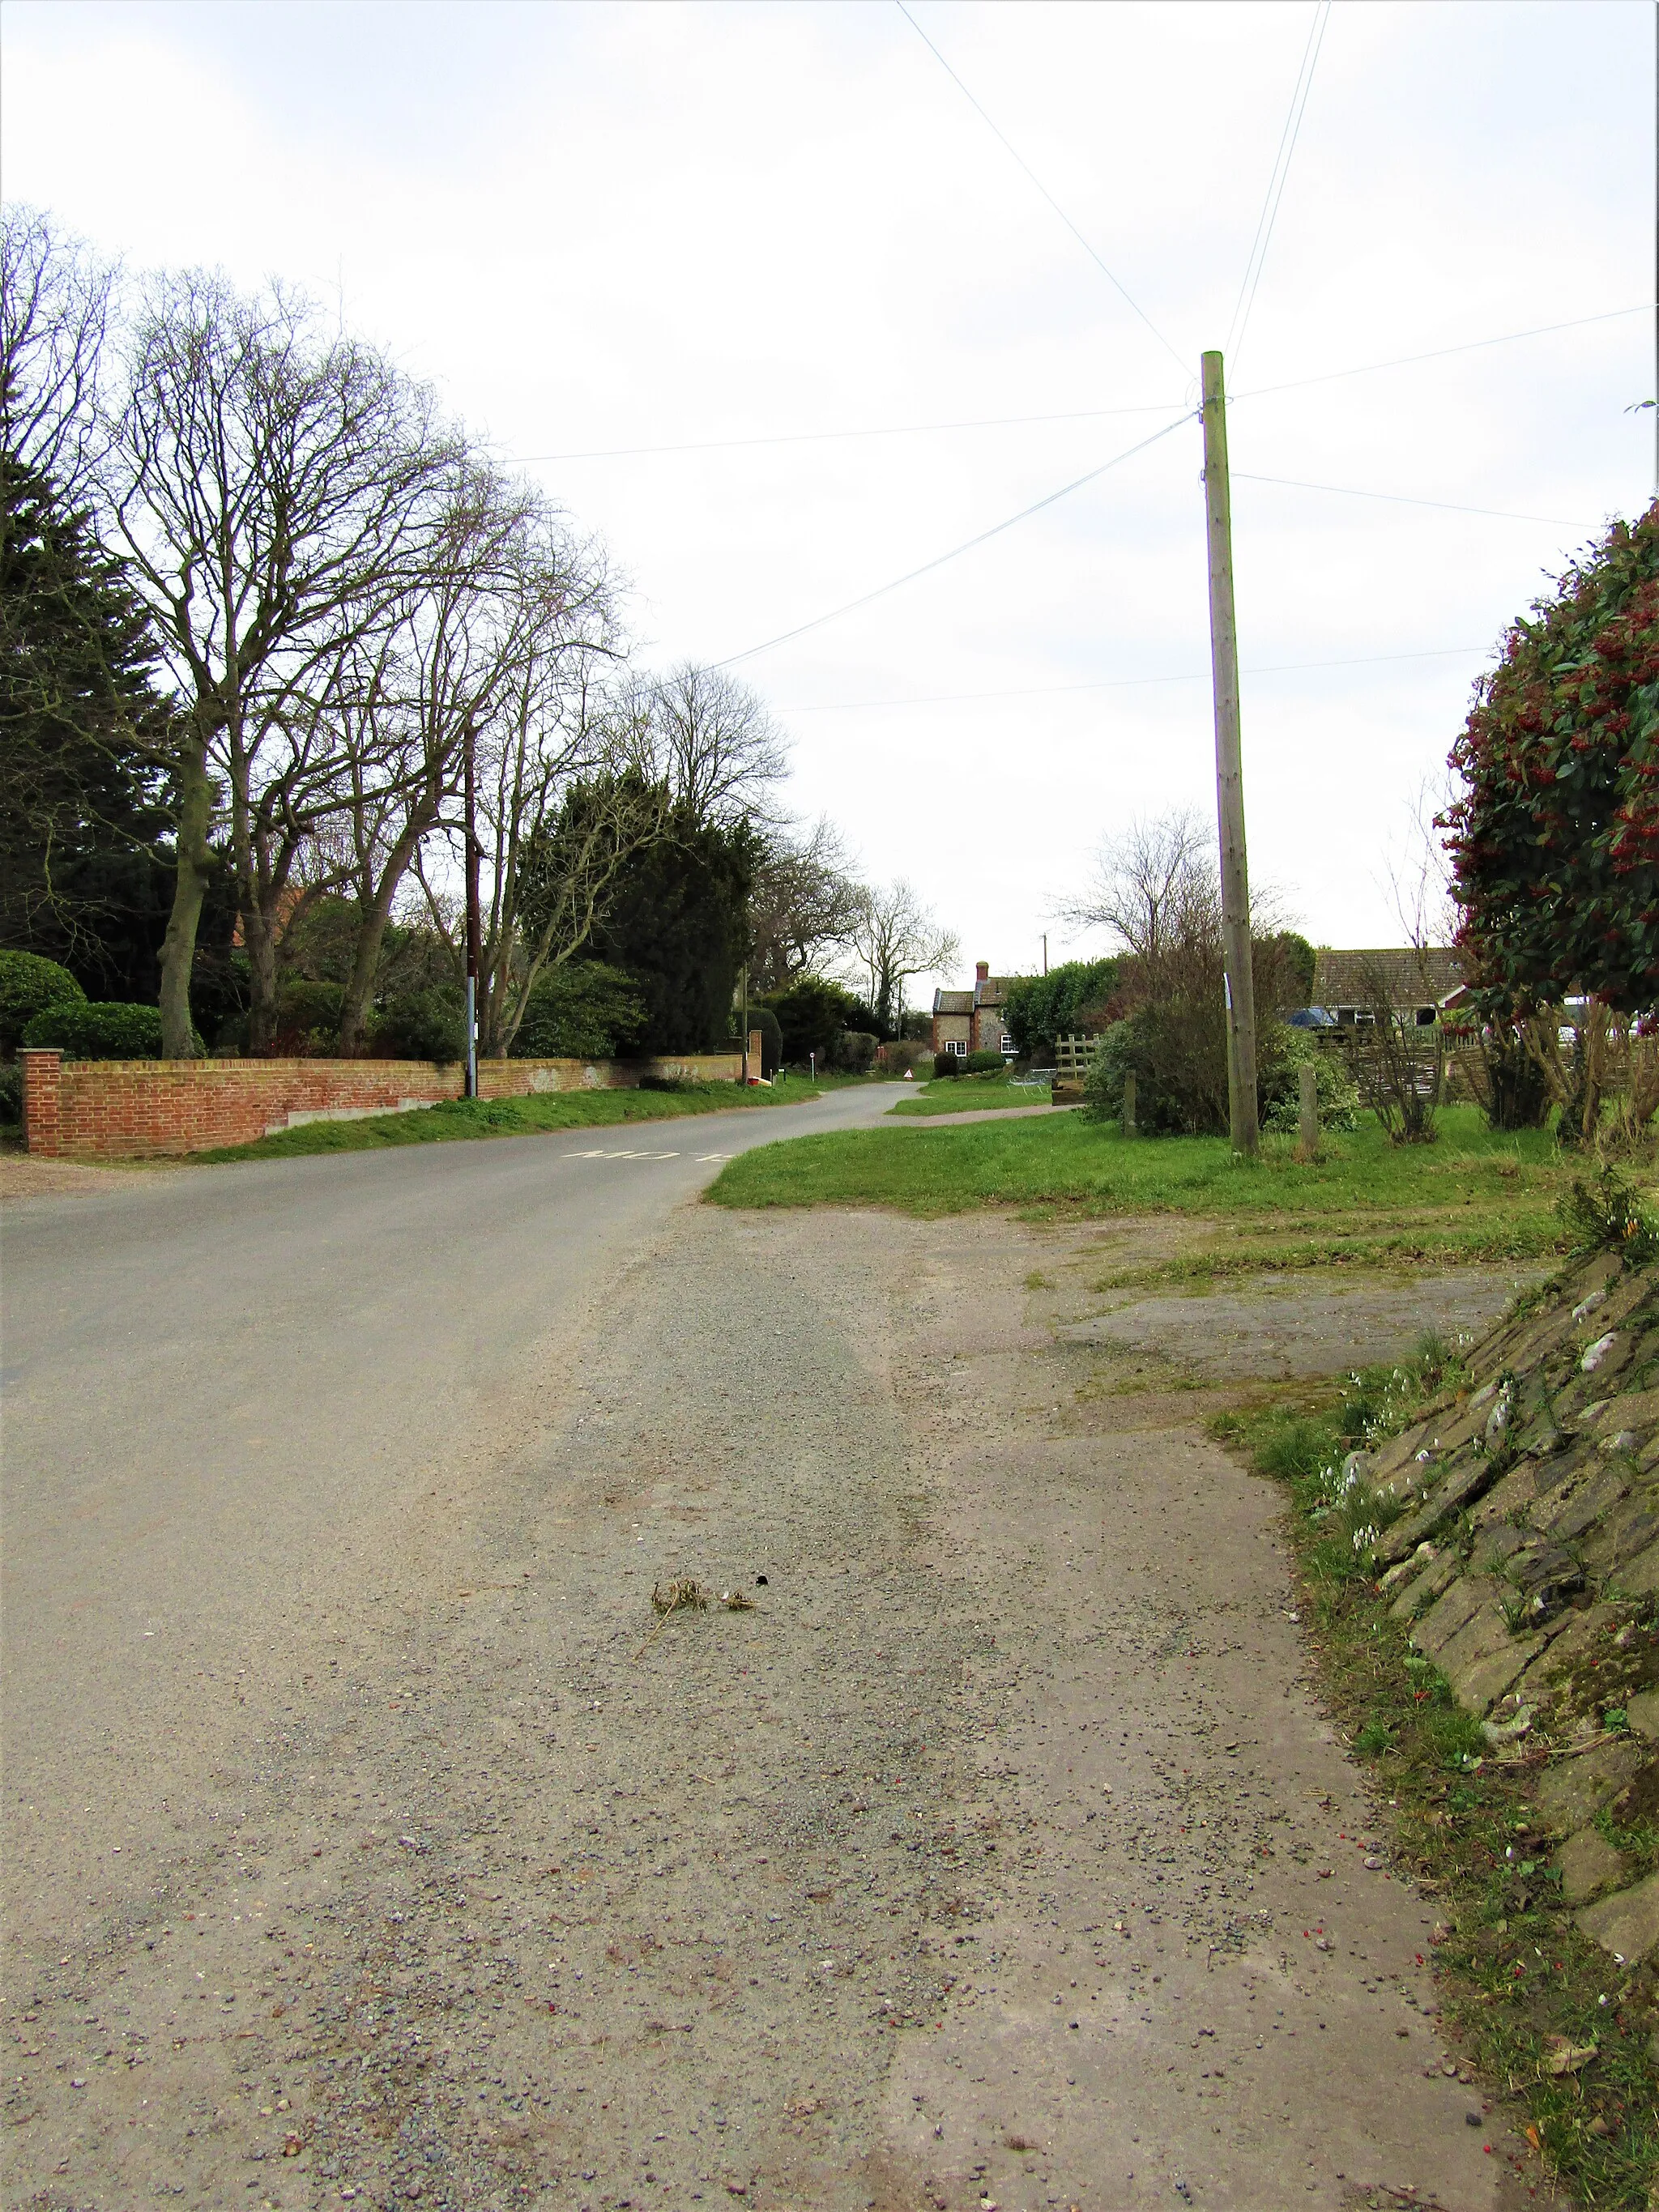 Photo showing: Looking east along the 'The Street'  in the village of Knapton, Norfolk, England.